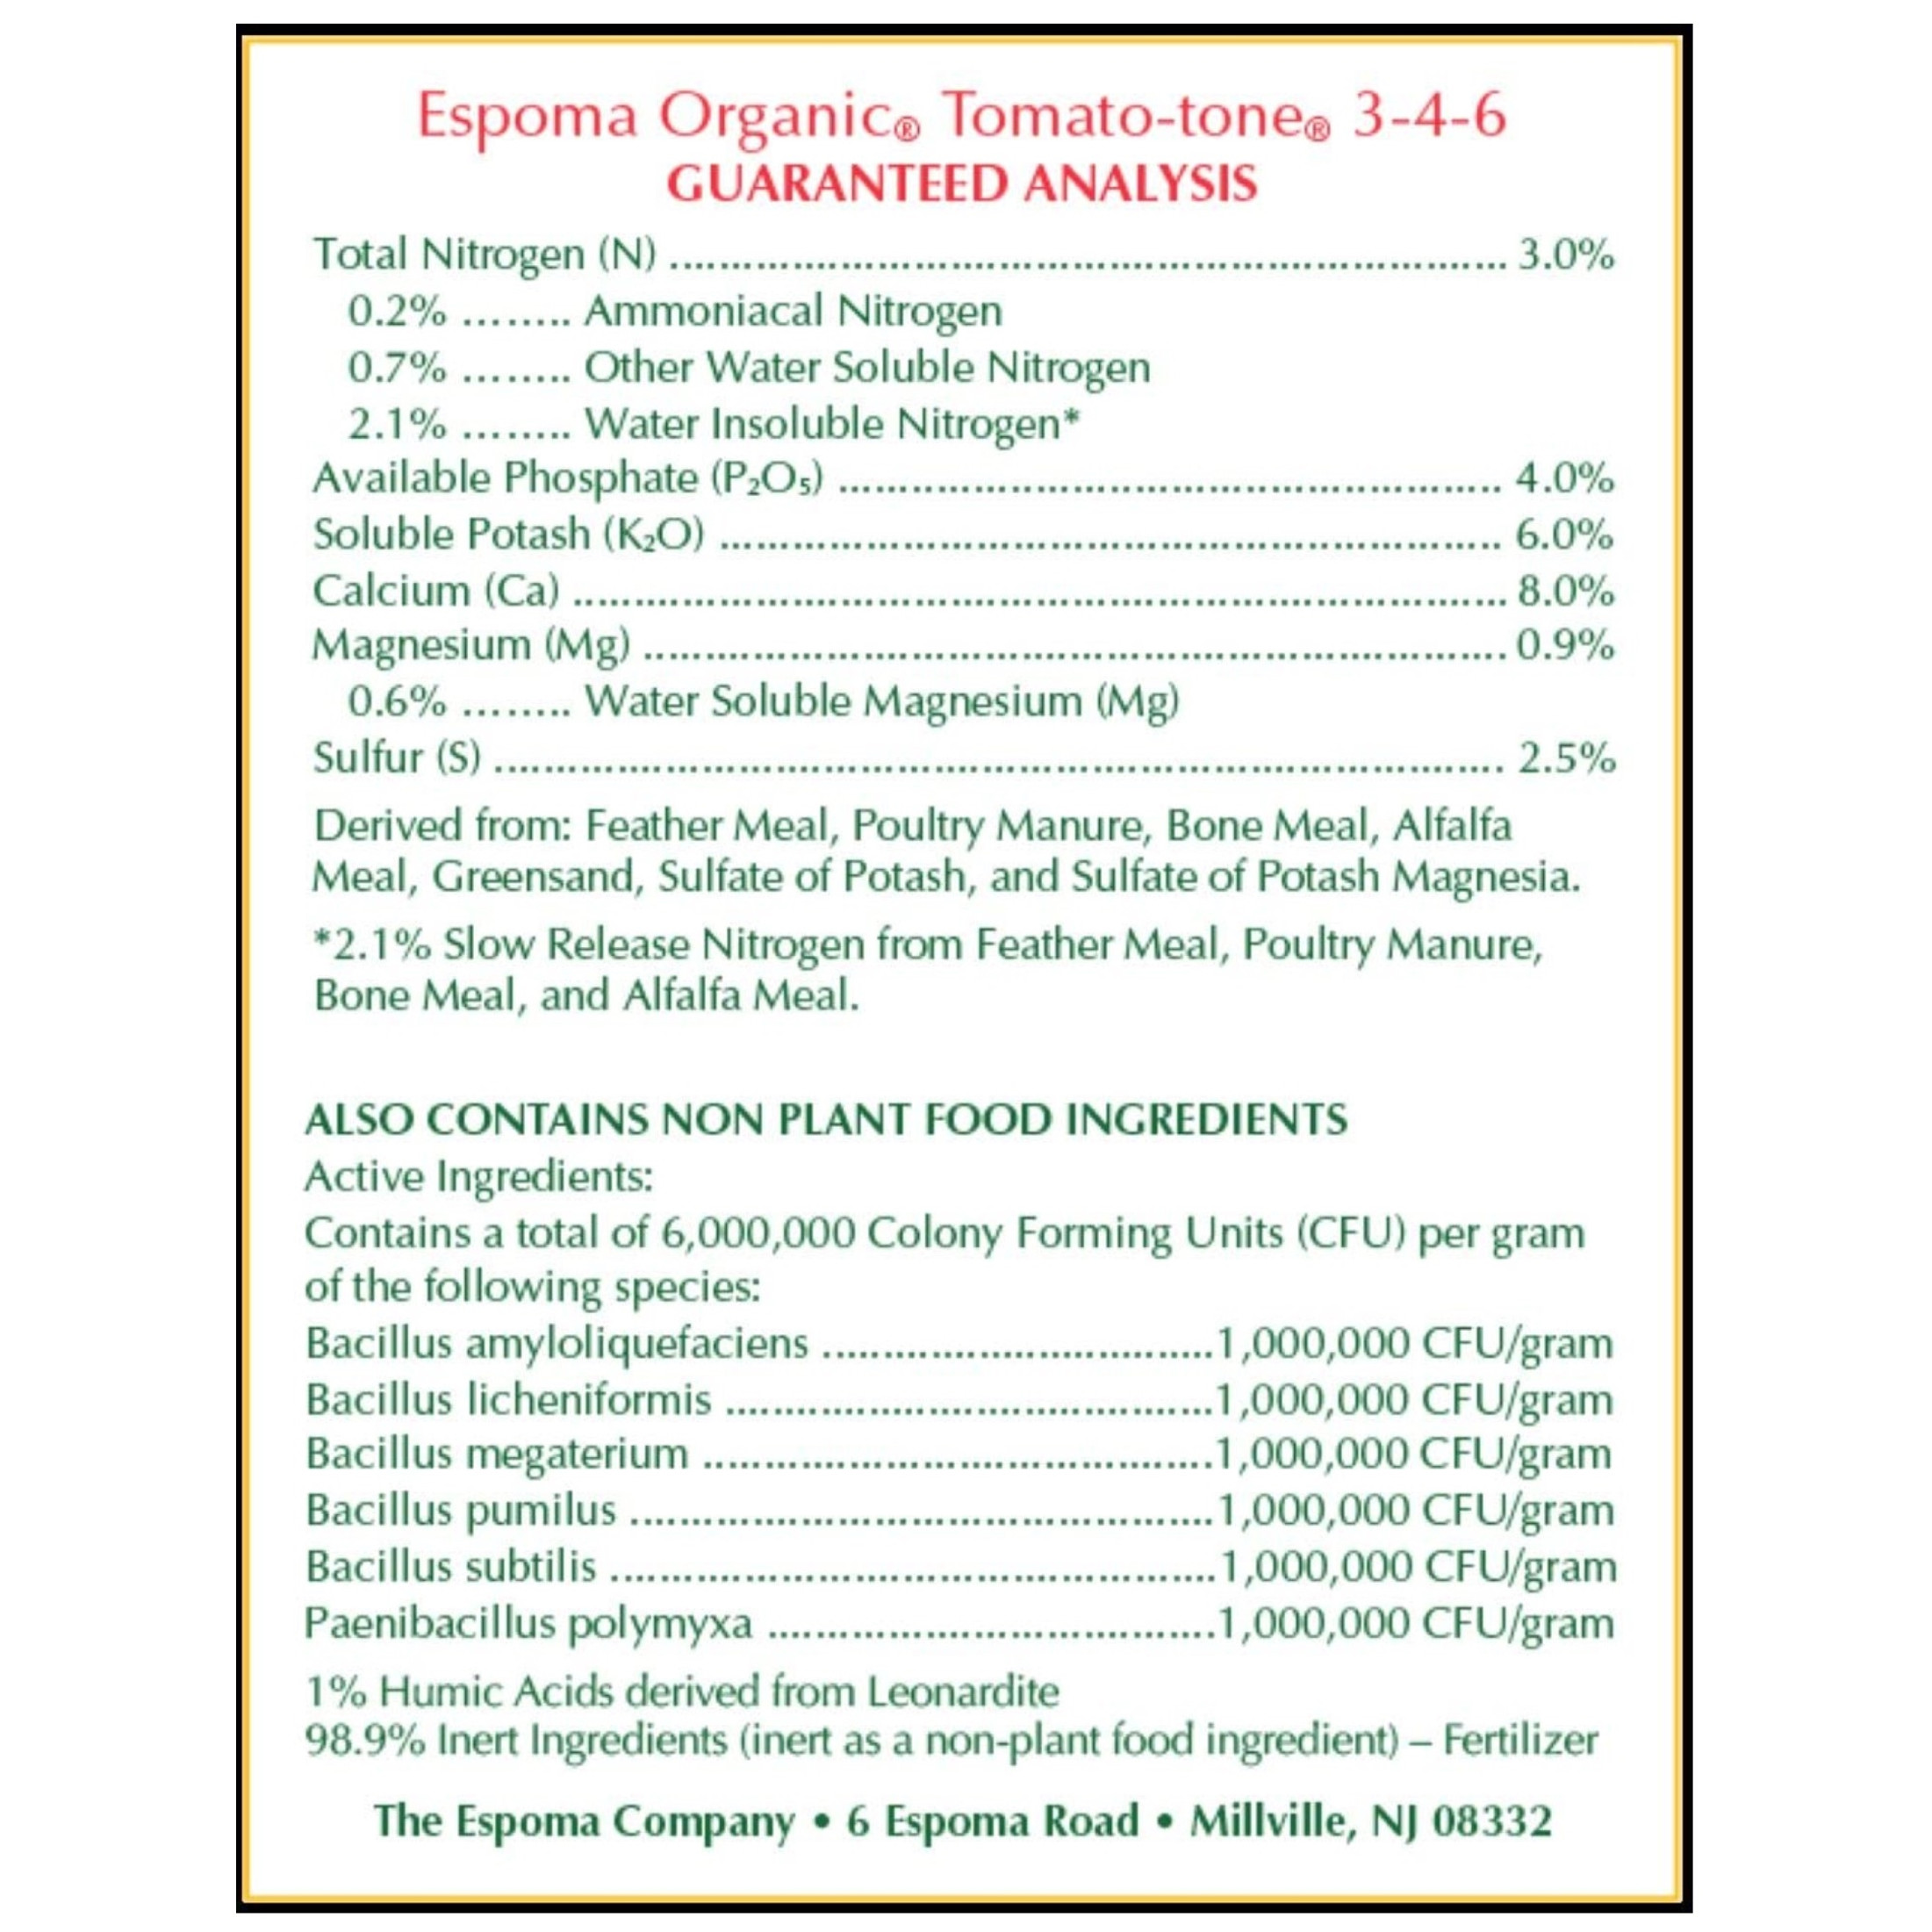 Espoma Organic Tomato-tone 3-4-6 with 8% Calcium, Organic Plant Food for All Types of Tomatoes and Vegetables, Promotes Flower and Fruit Production